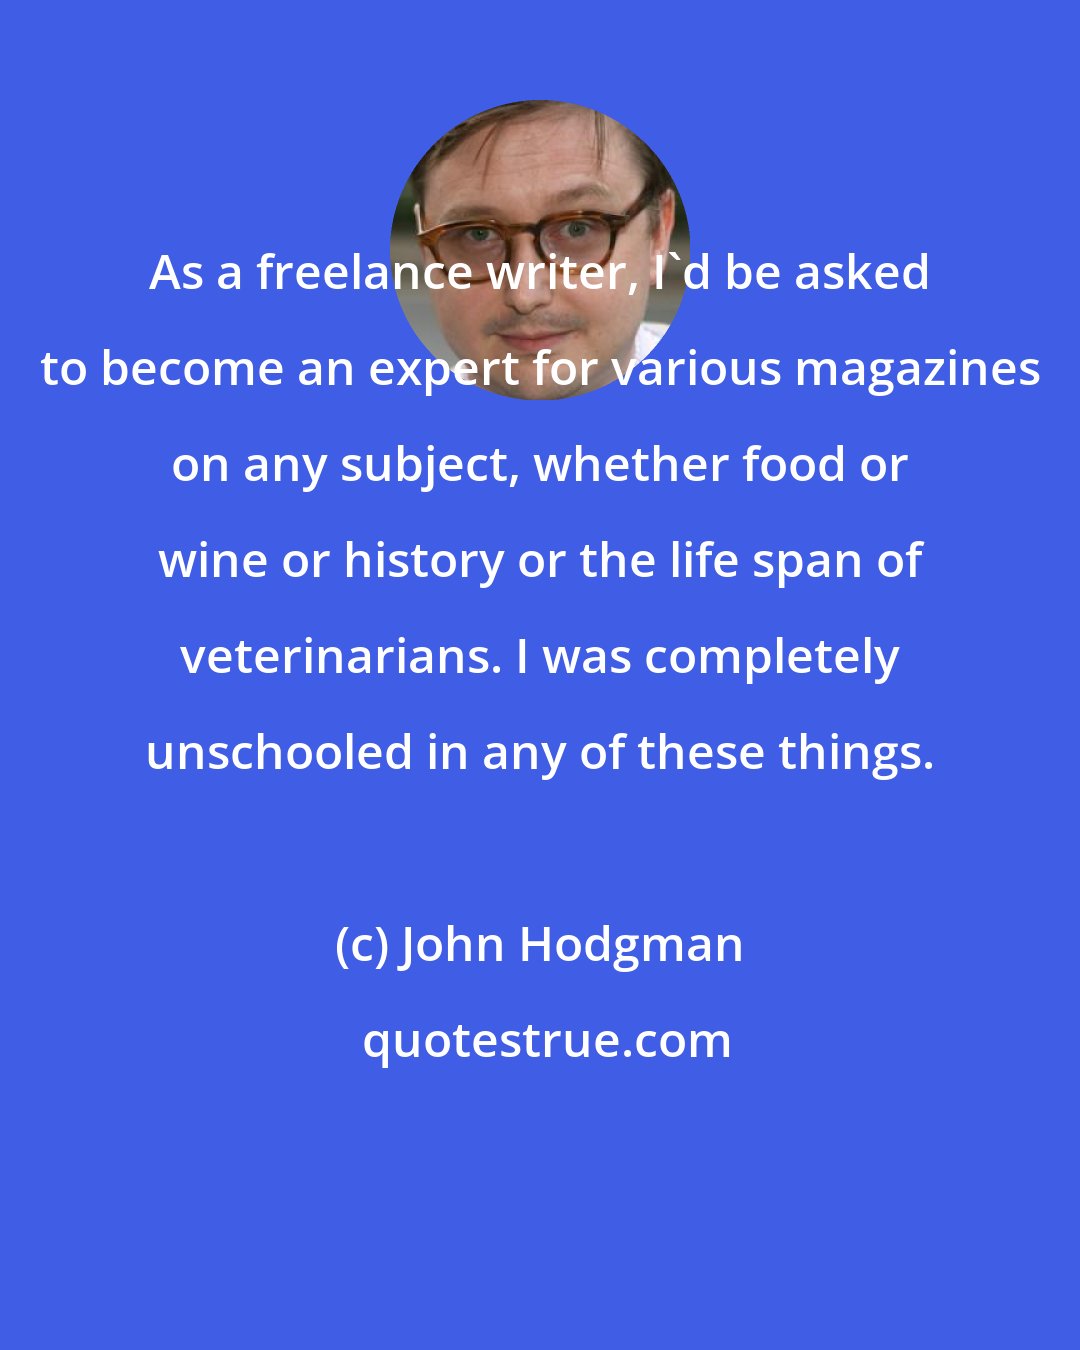 John Hodgman: As a freelance writer, I'd be asked to become an expert for various magazines on any subject, whether food or wine or history or the life span of veterinarians. I was completely unschooled in any of these things.